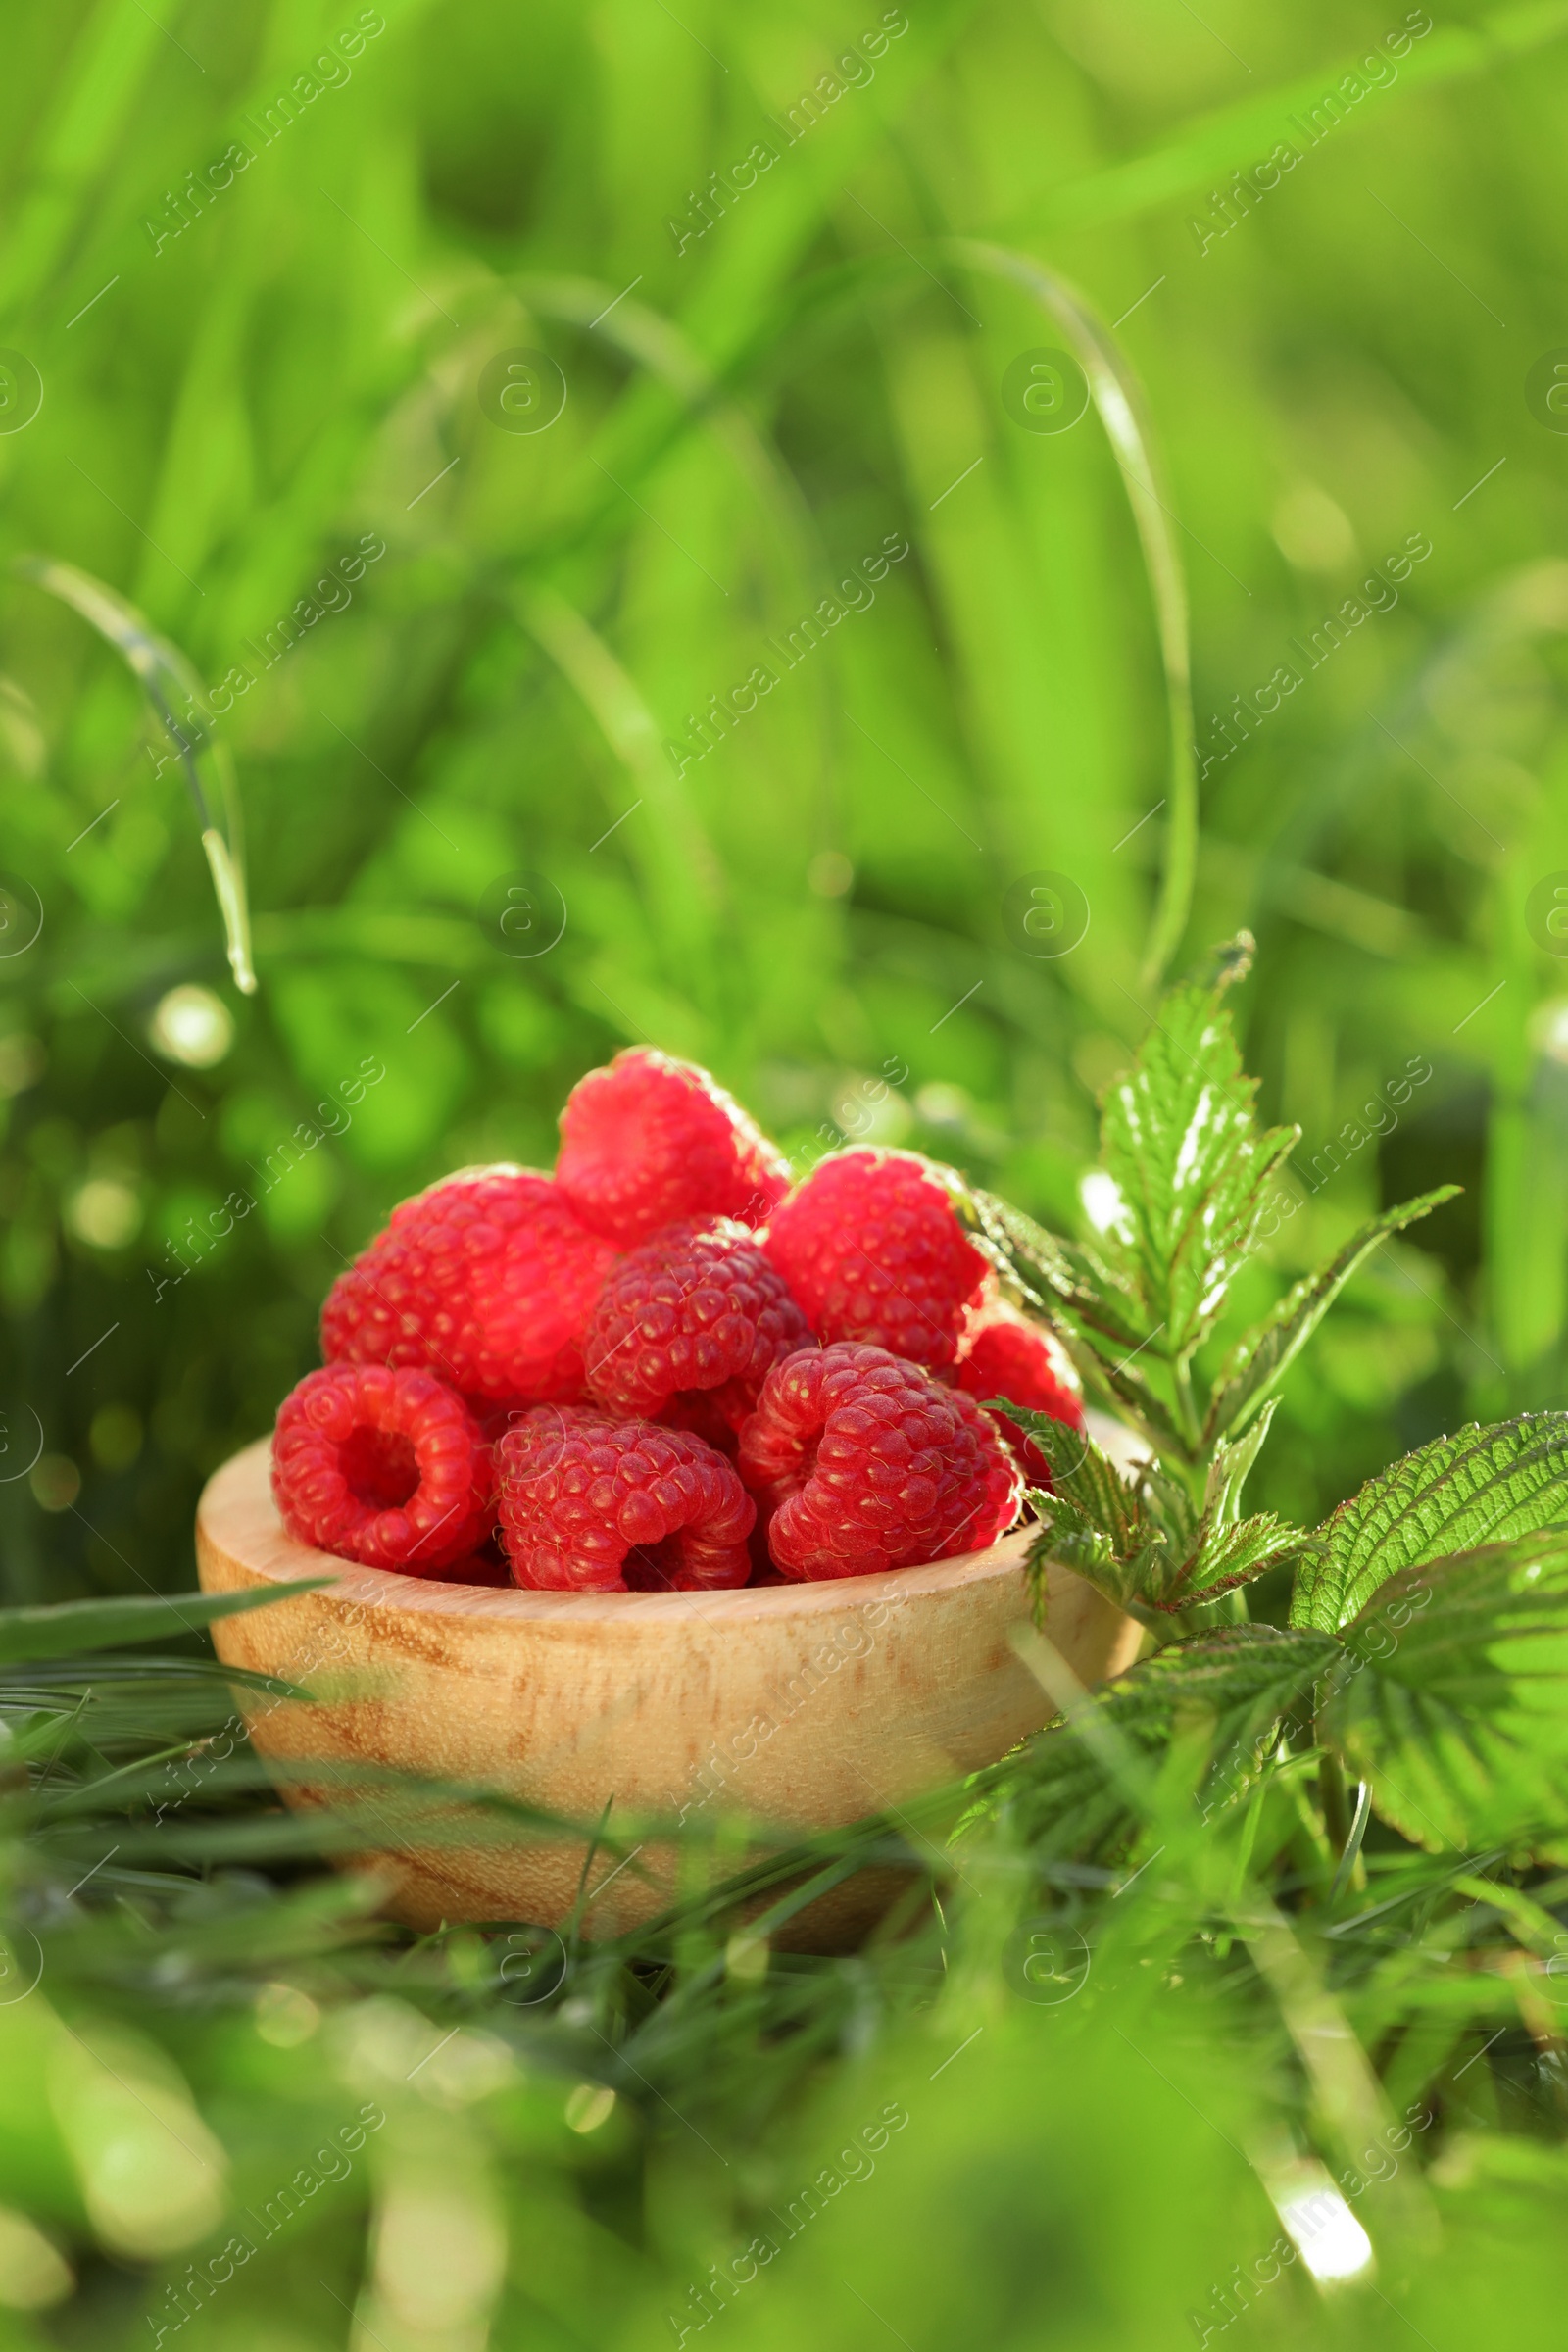 Photo of Tasty ripe raspberries in bowl on green grass outdoors, space for text